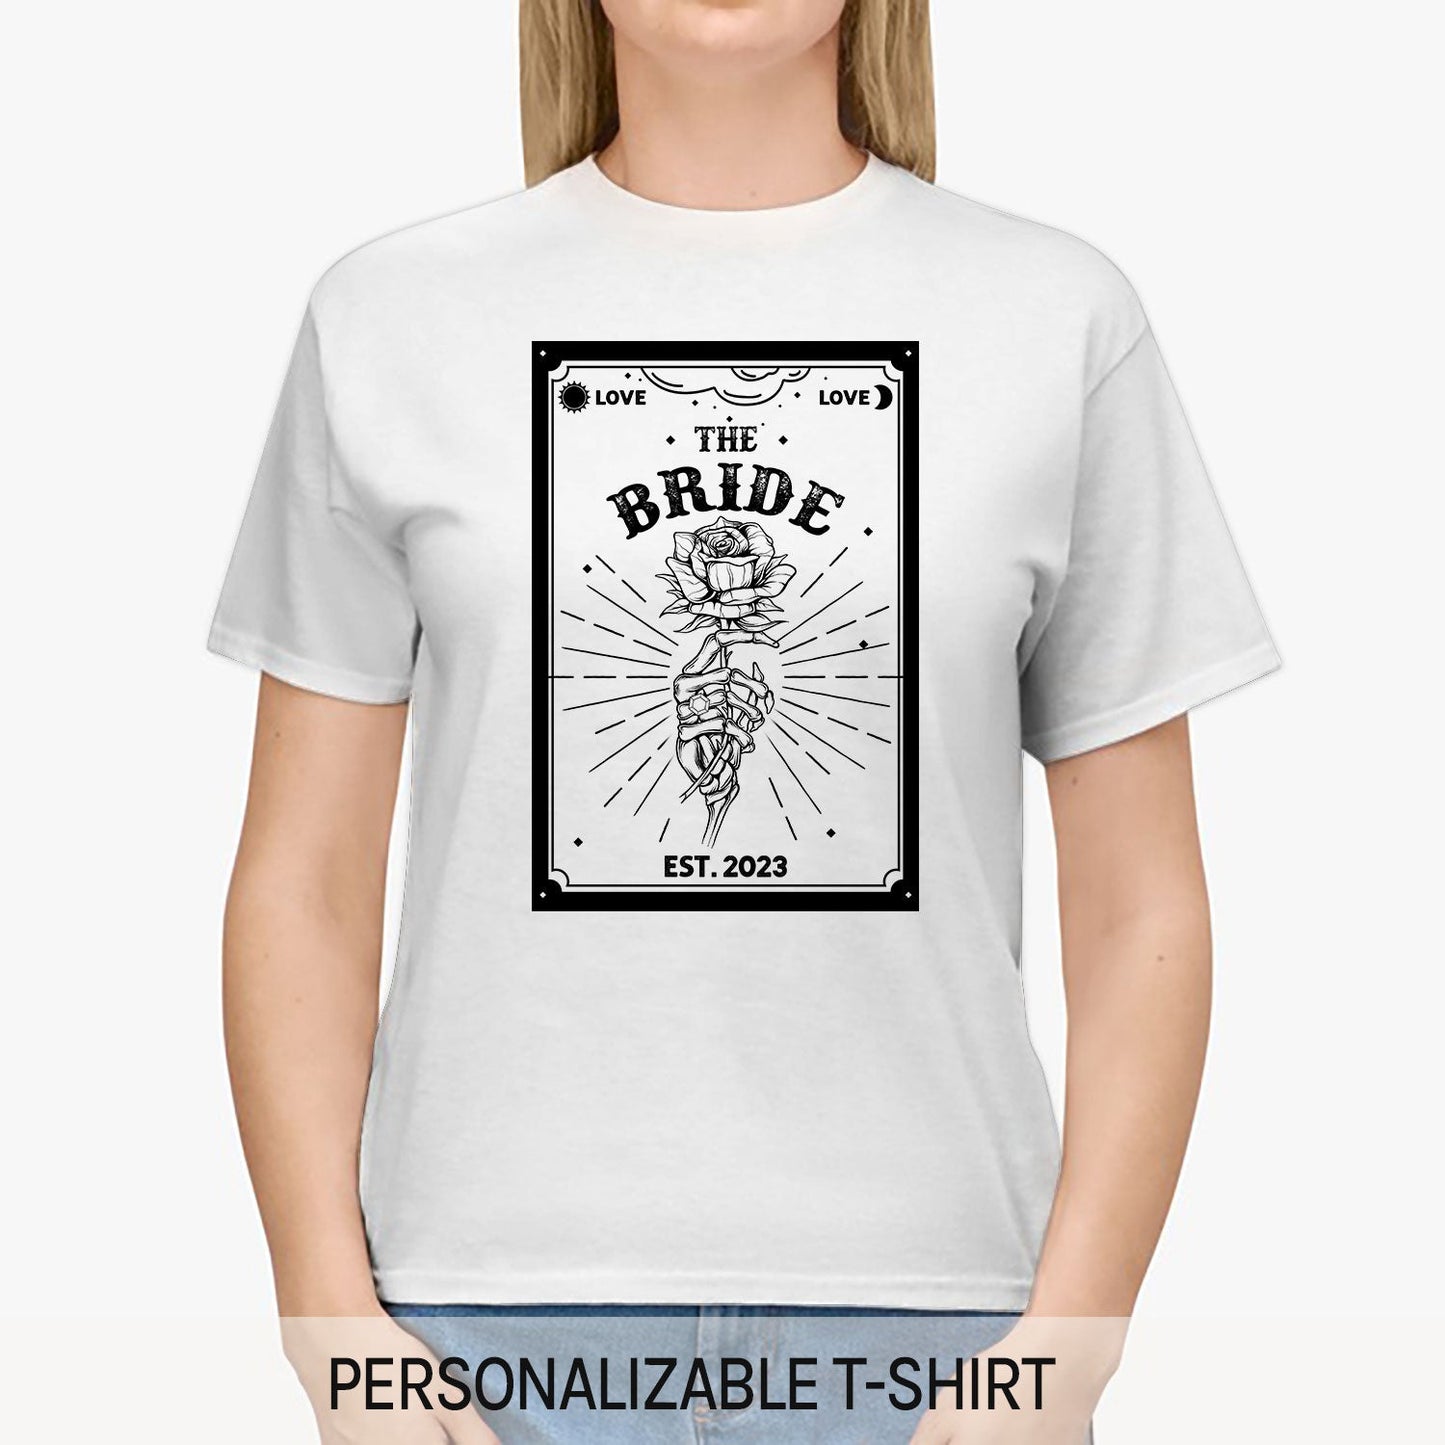 The Bride - Personalized Anniversary or Halloween gift for Wife - Custom Tshirt - MyMindfulGifts